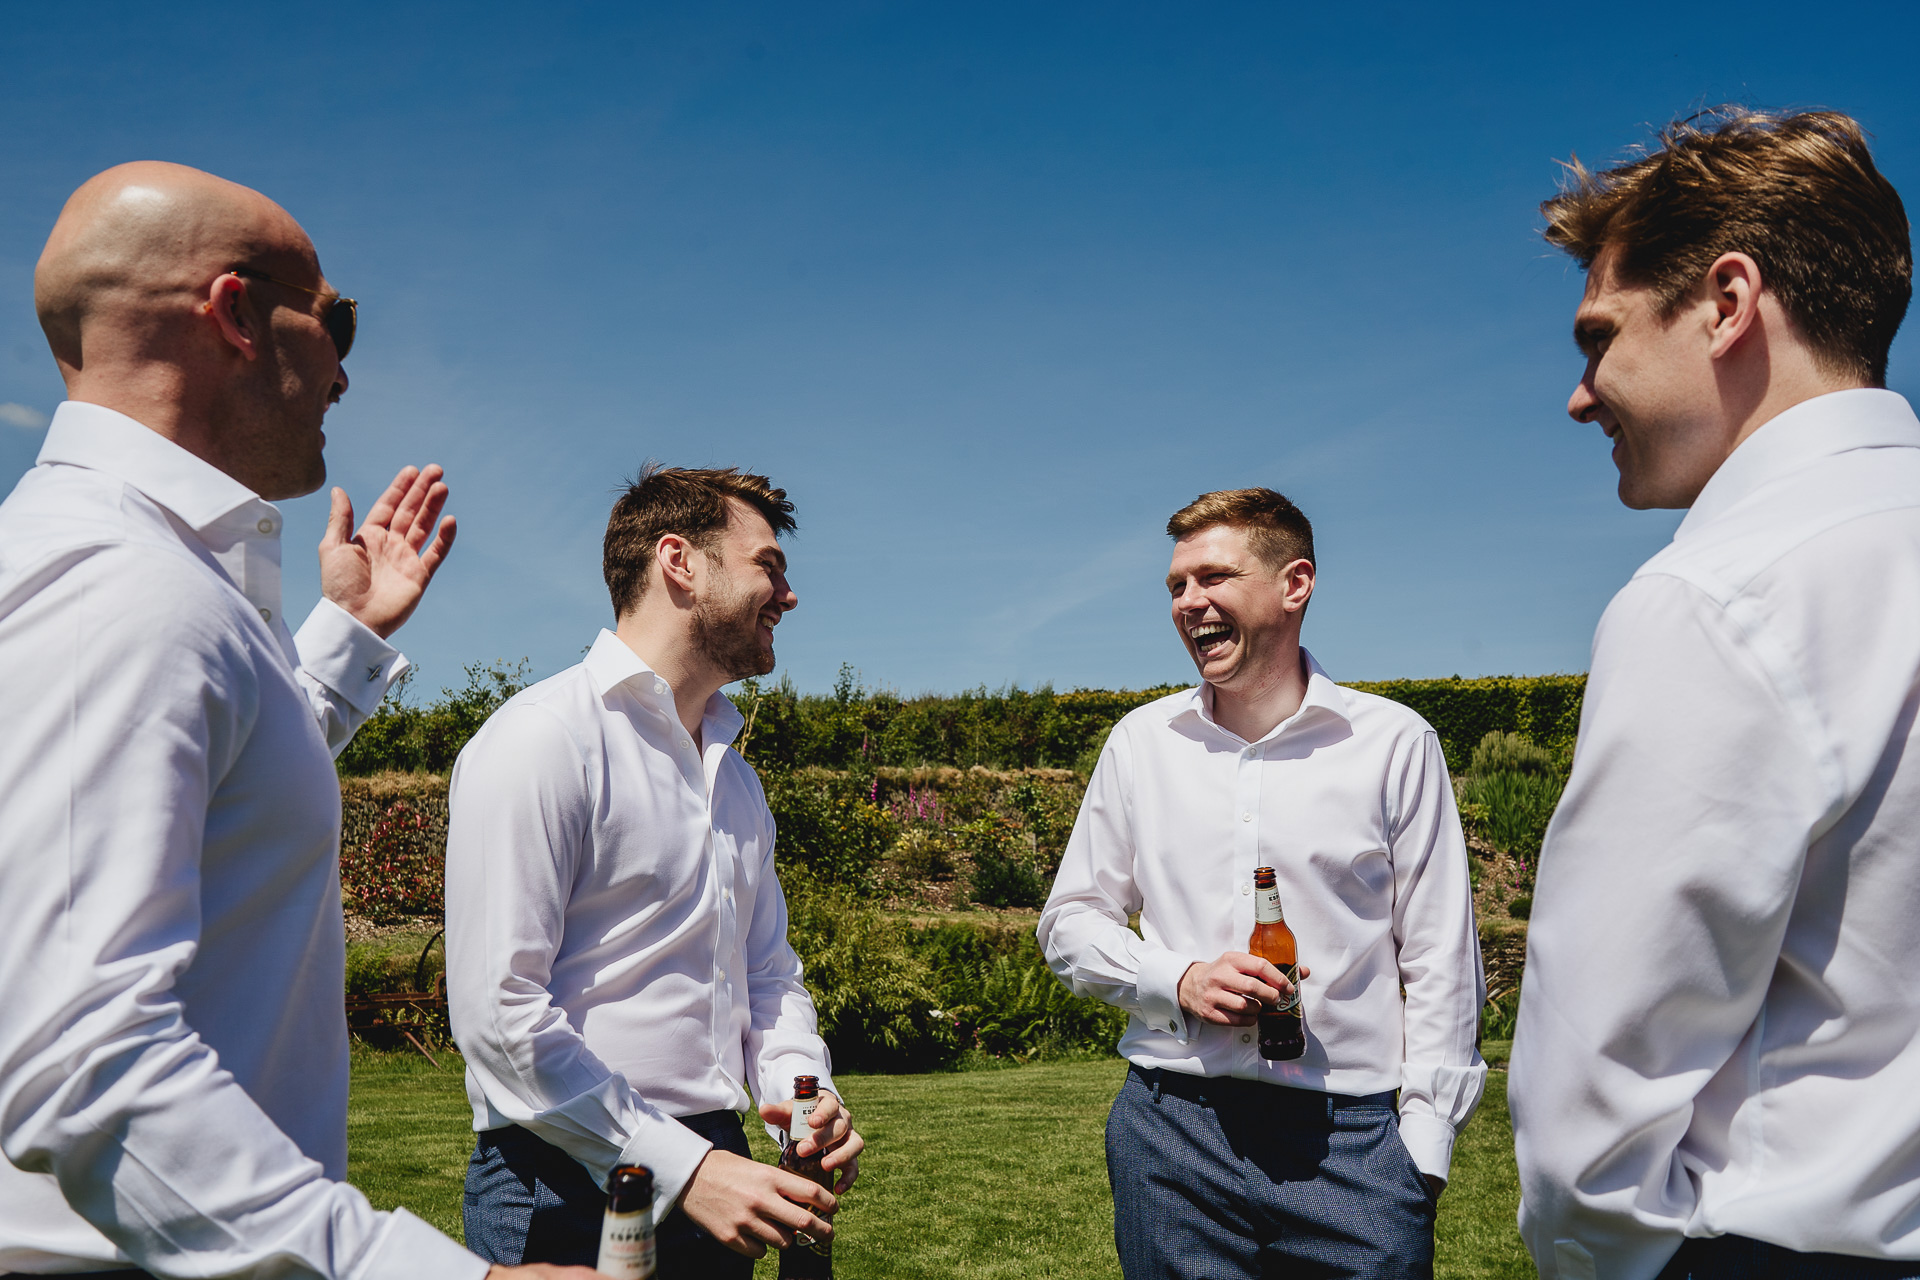 A group of men in white shirts laughing together